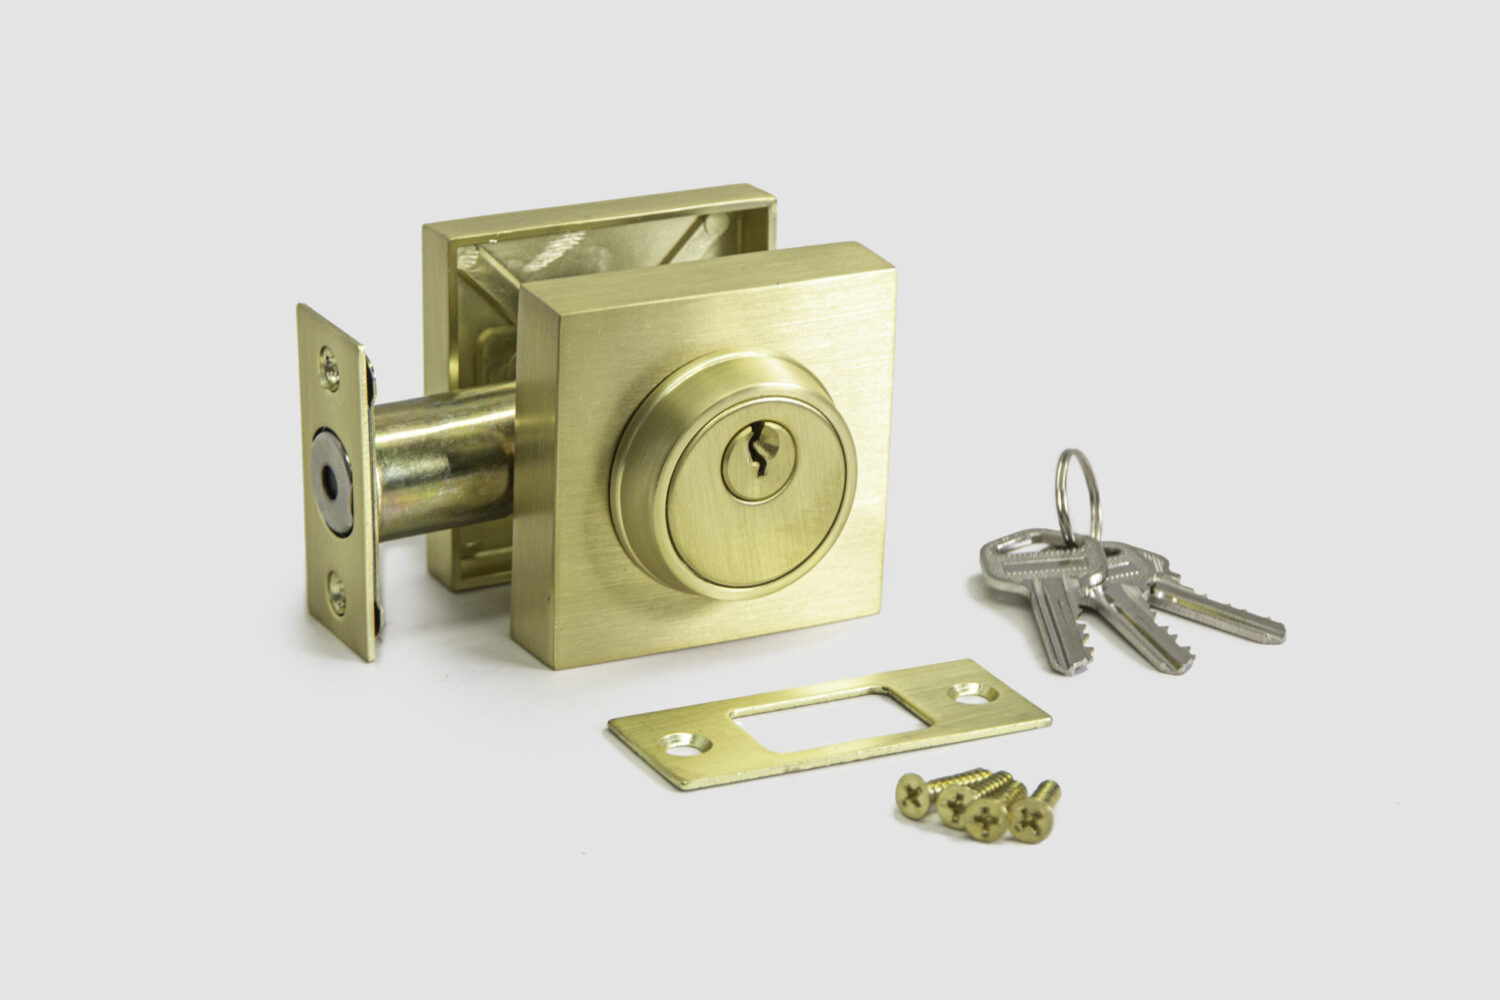 square deadbolt satin gold color, adjustable latch, all installation hardware is included